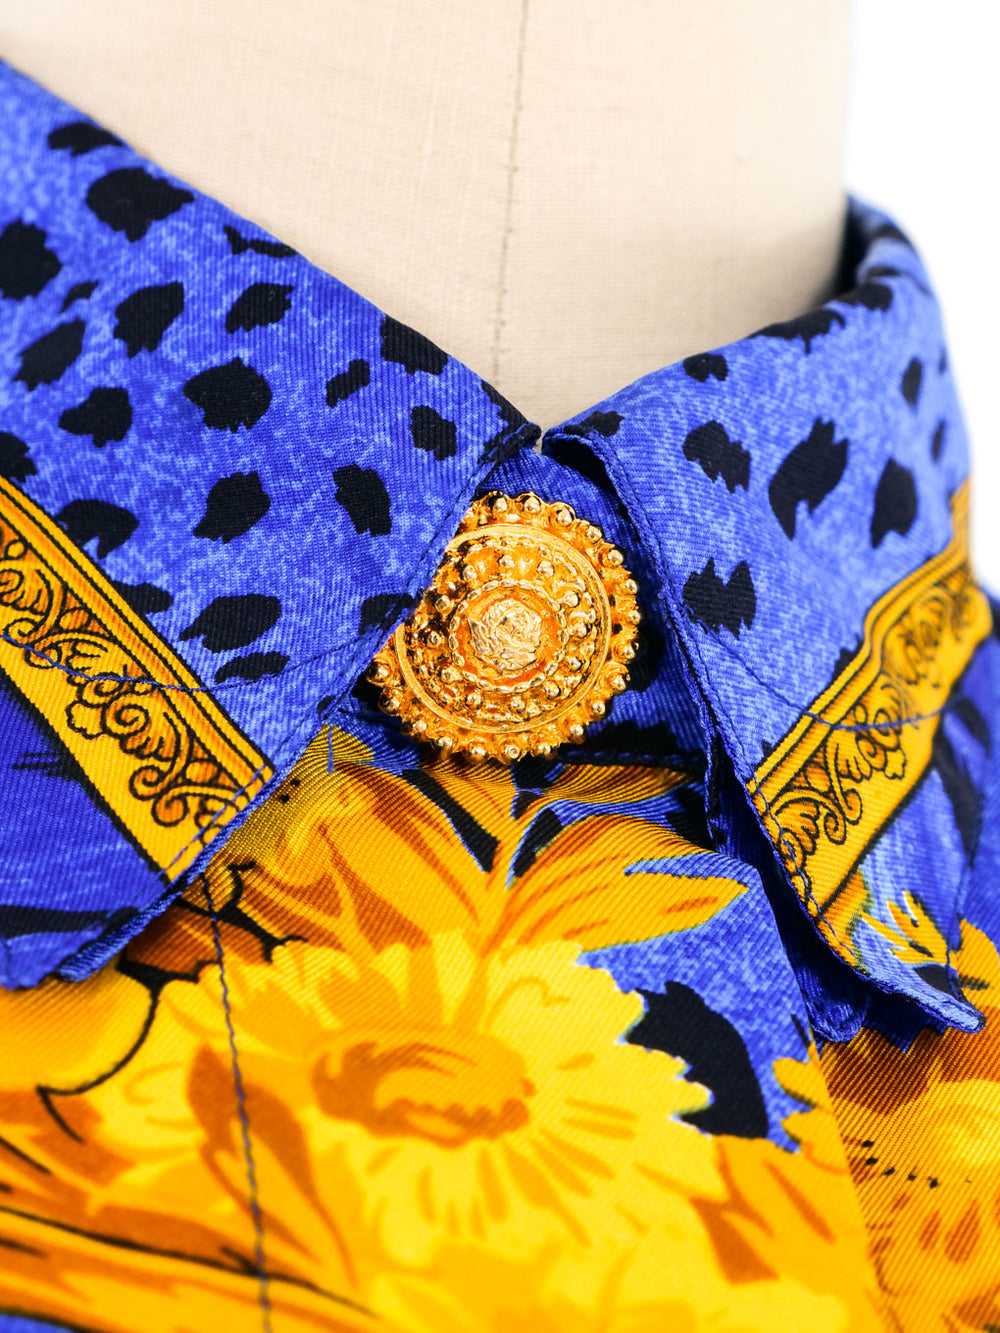 Gianni Versace Couture Baroque Printed Silk Blouse - image 3